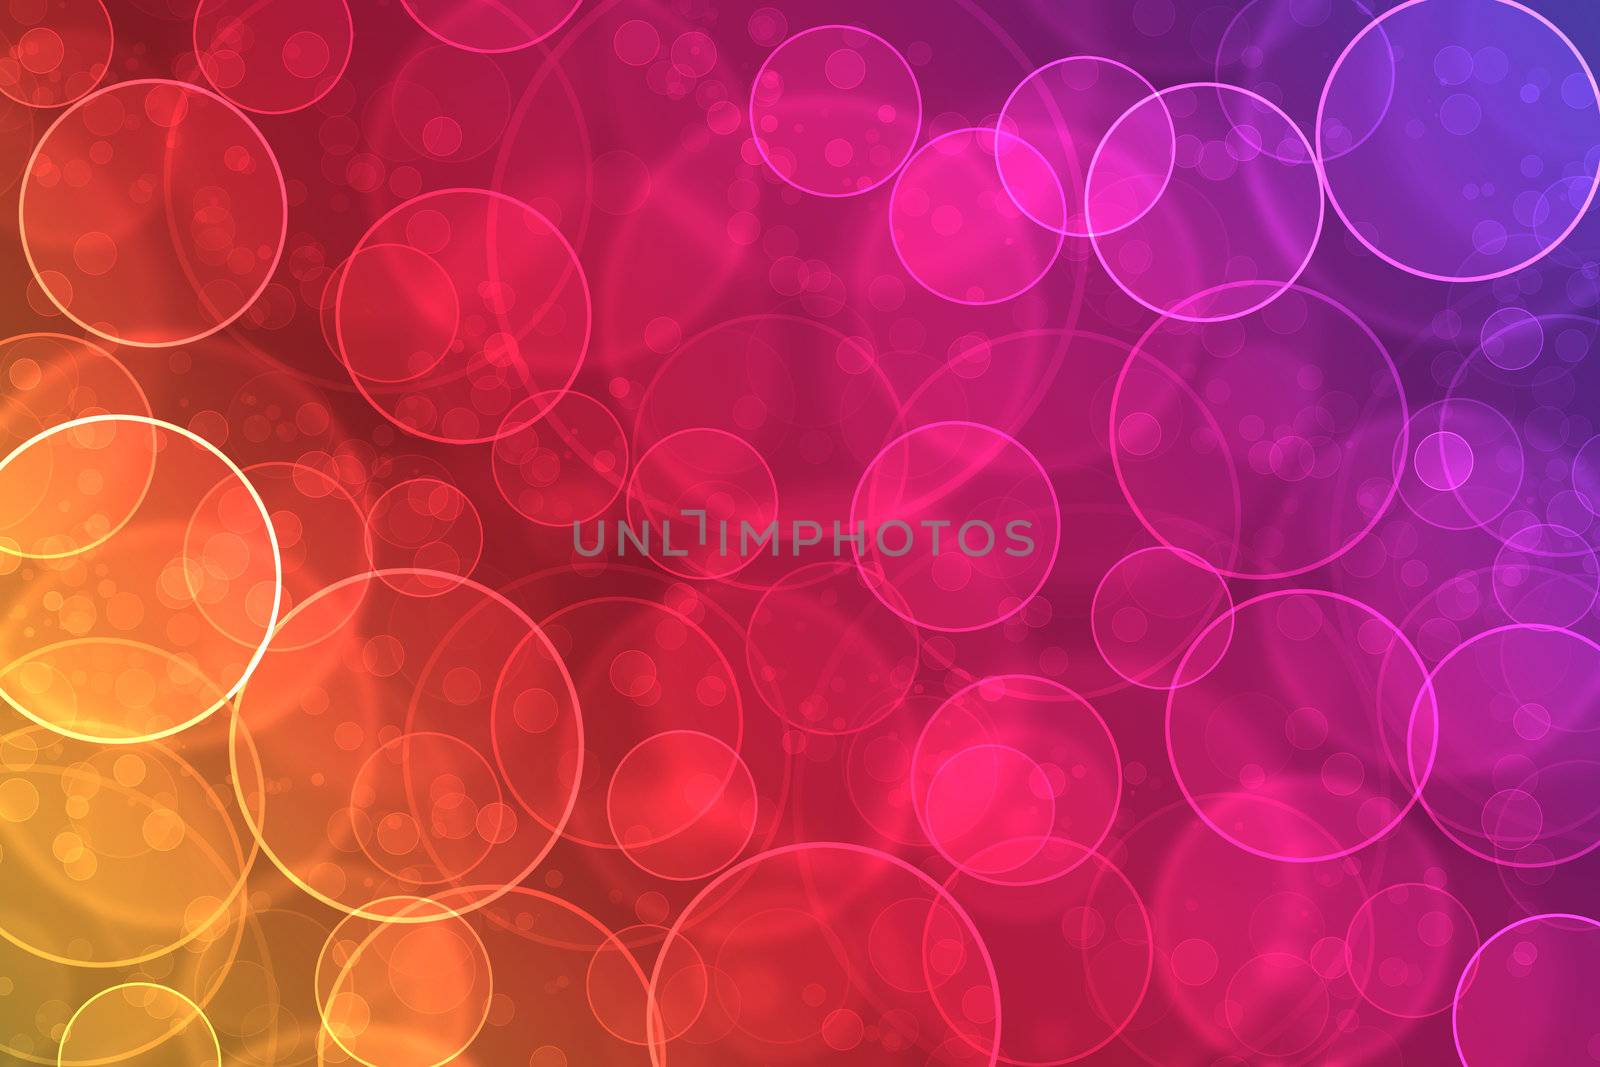 Abstract on a colorful background digital bokeh effect by jakgree